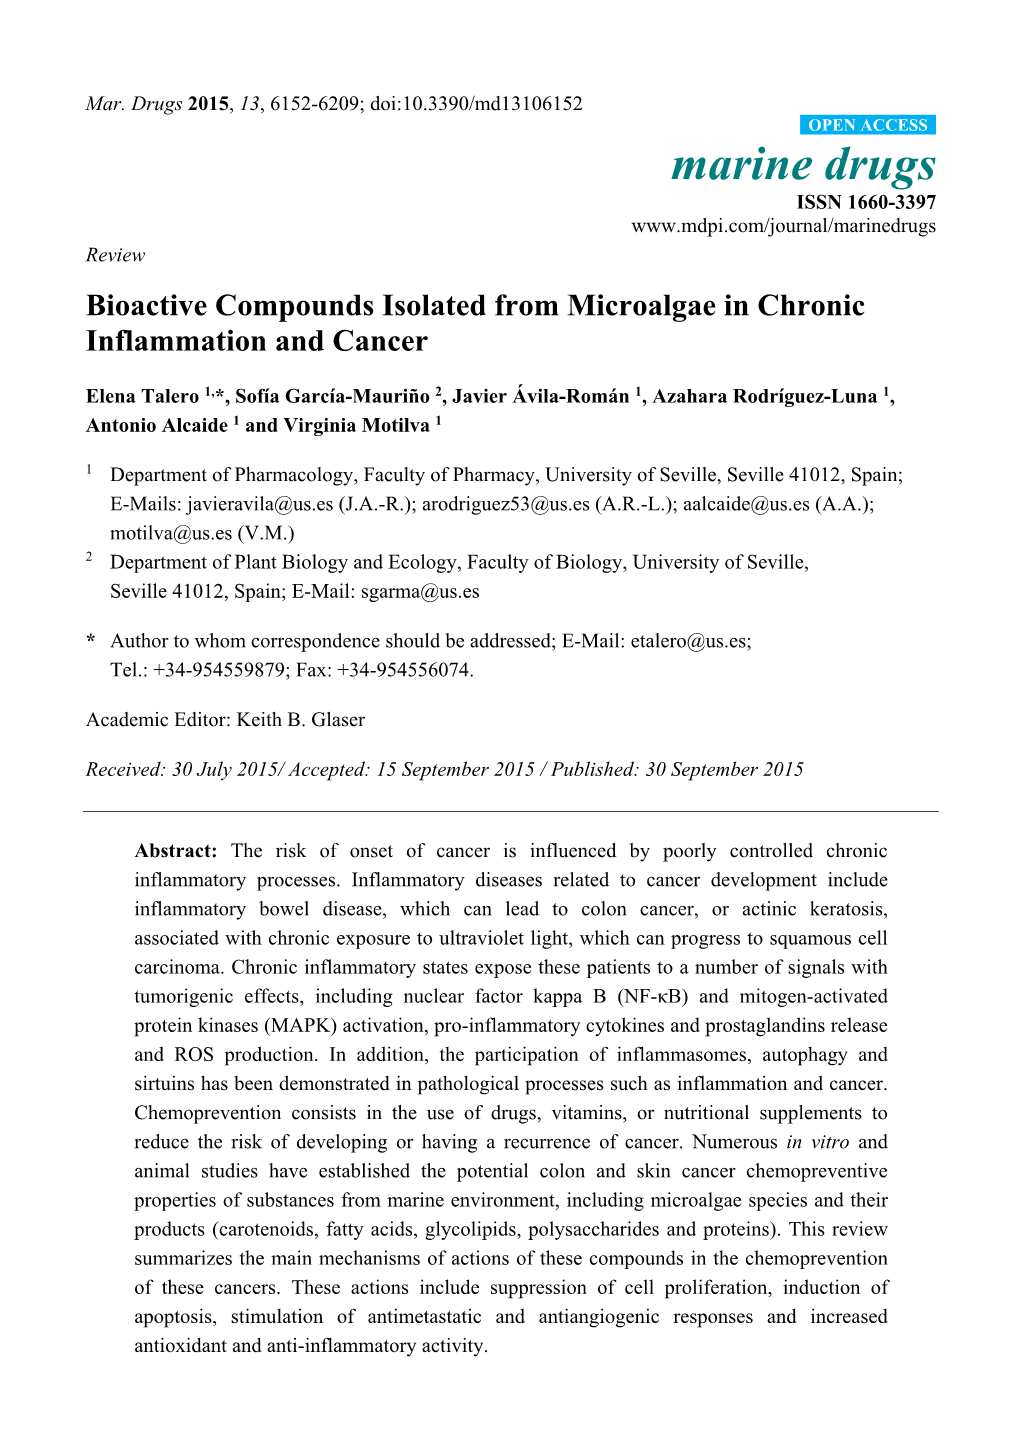 Bioactive Compounds Isolated from Microalgae in Chronic Inflammation and Cancer